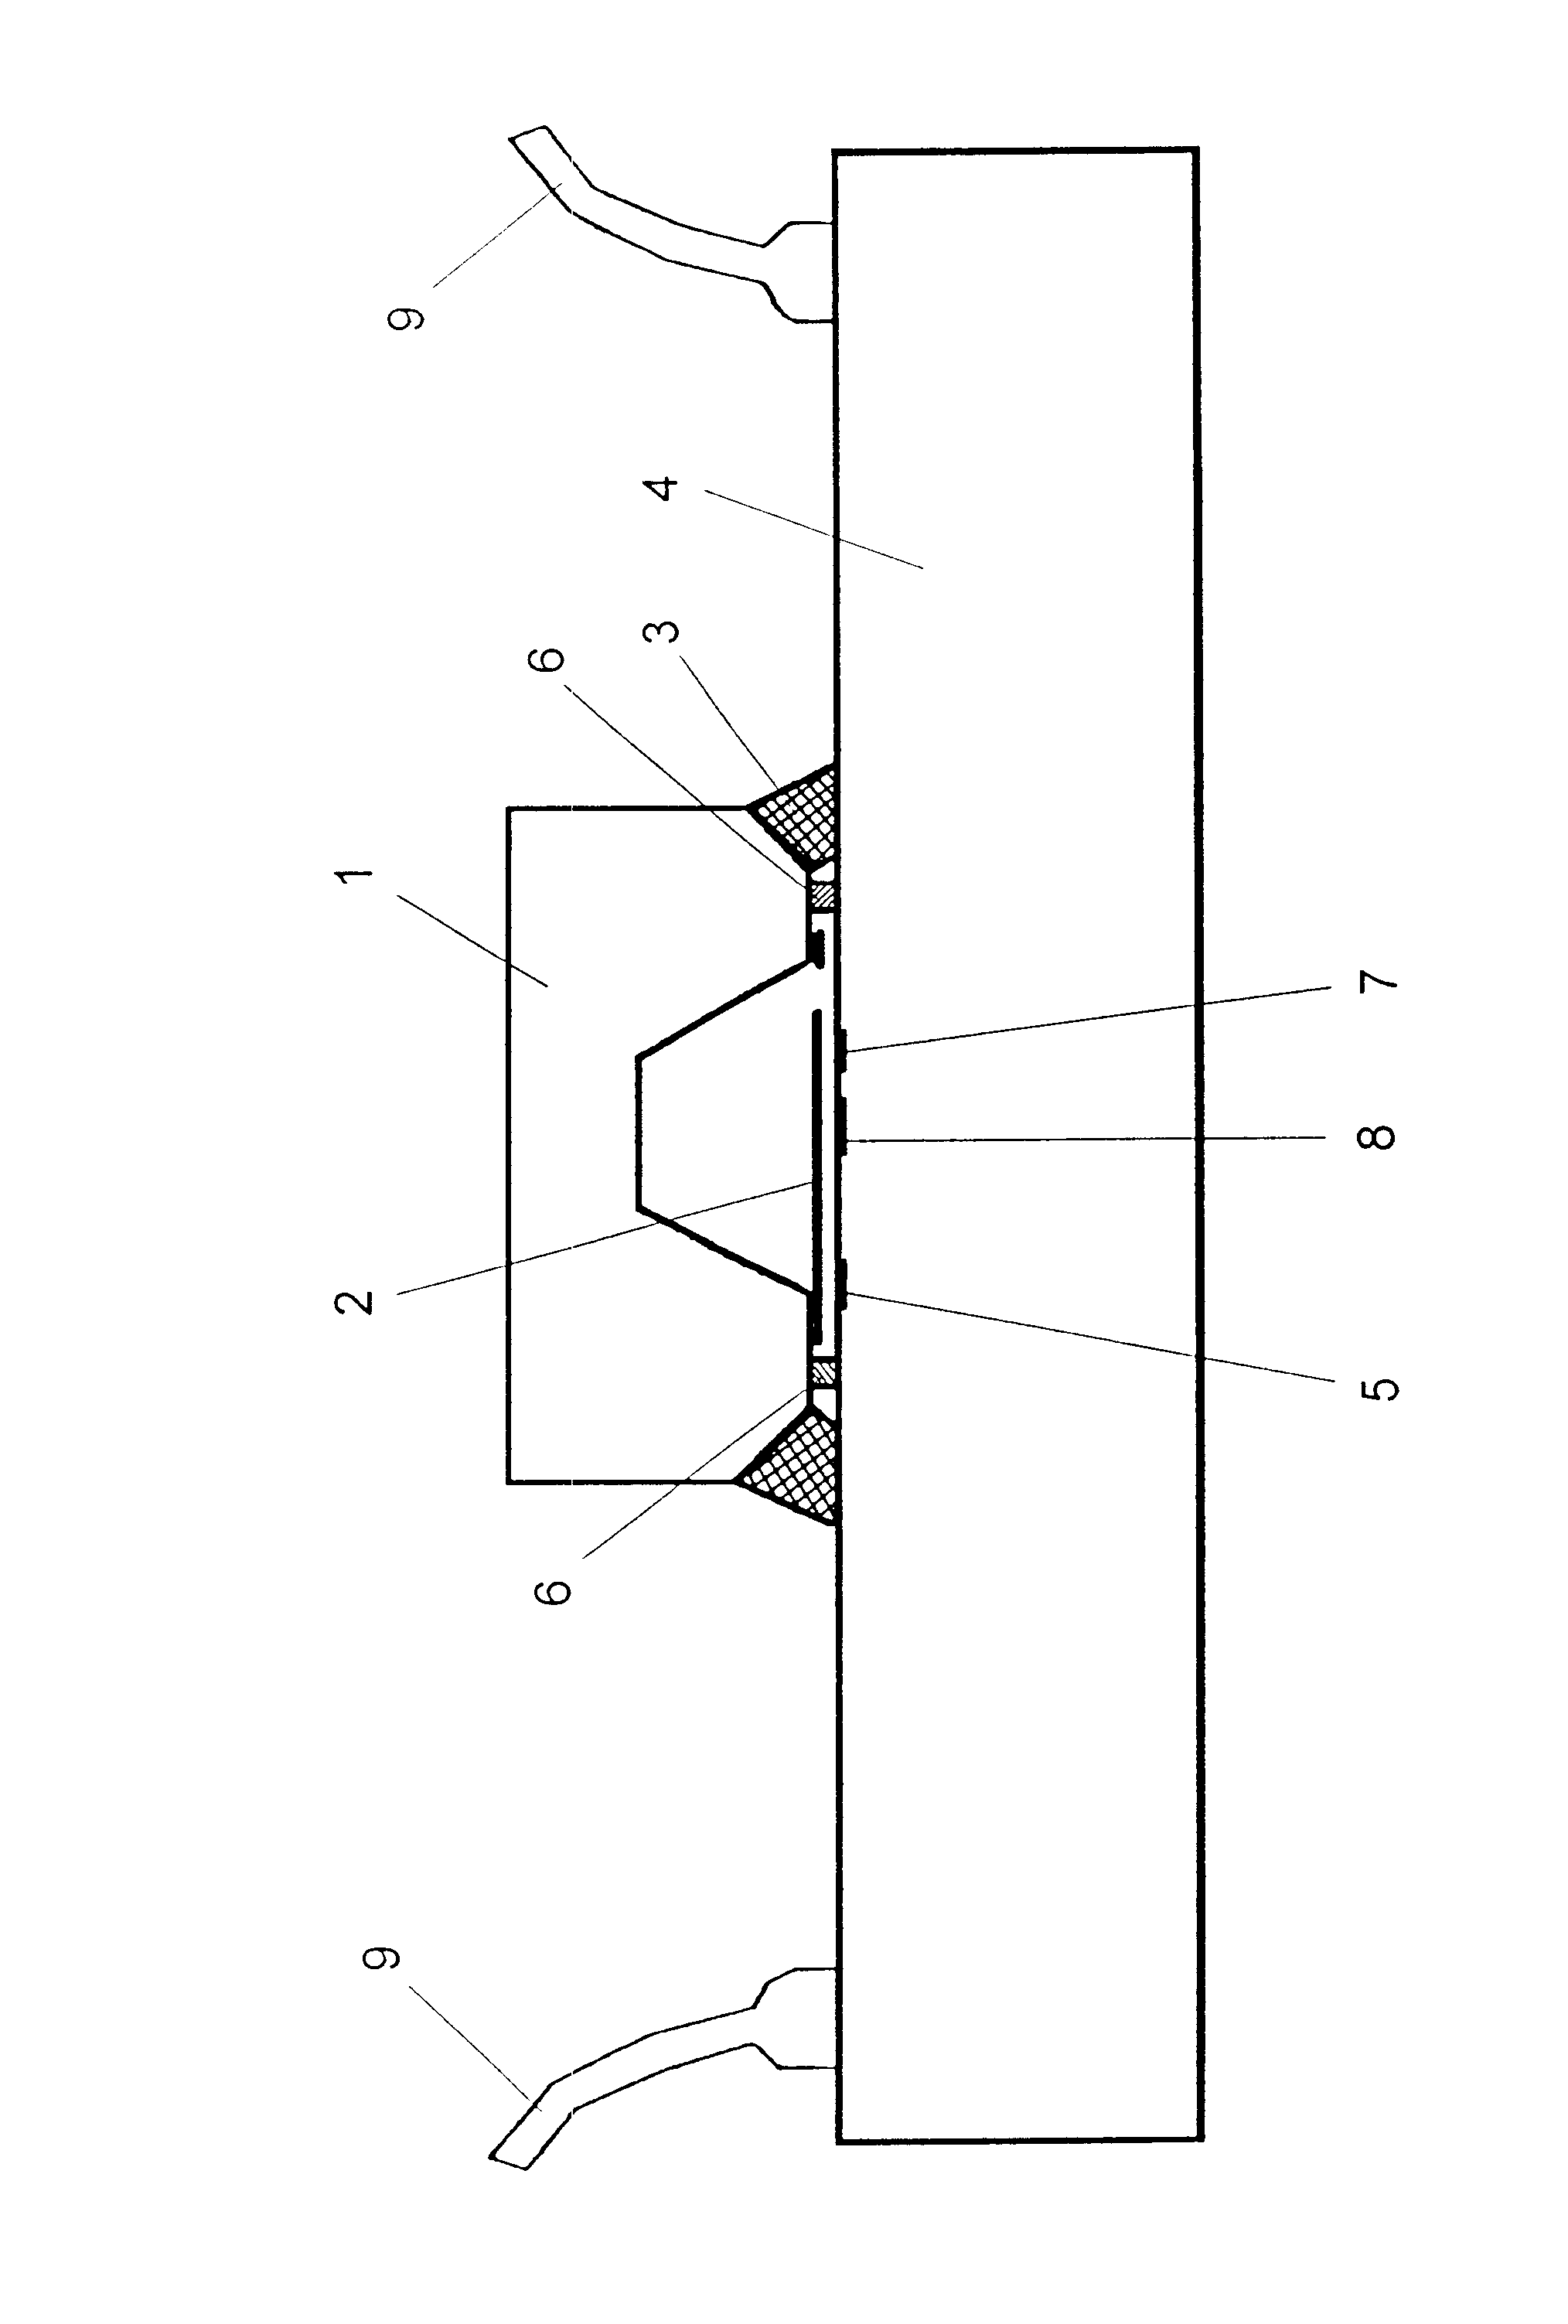 Microsensor having a sensor device connected to an integrated circuit by a solder joint